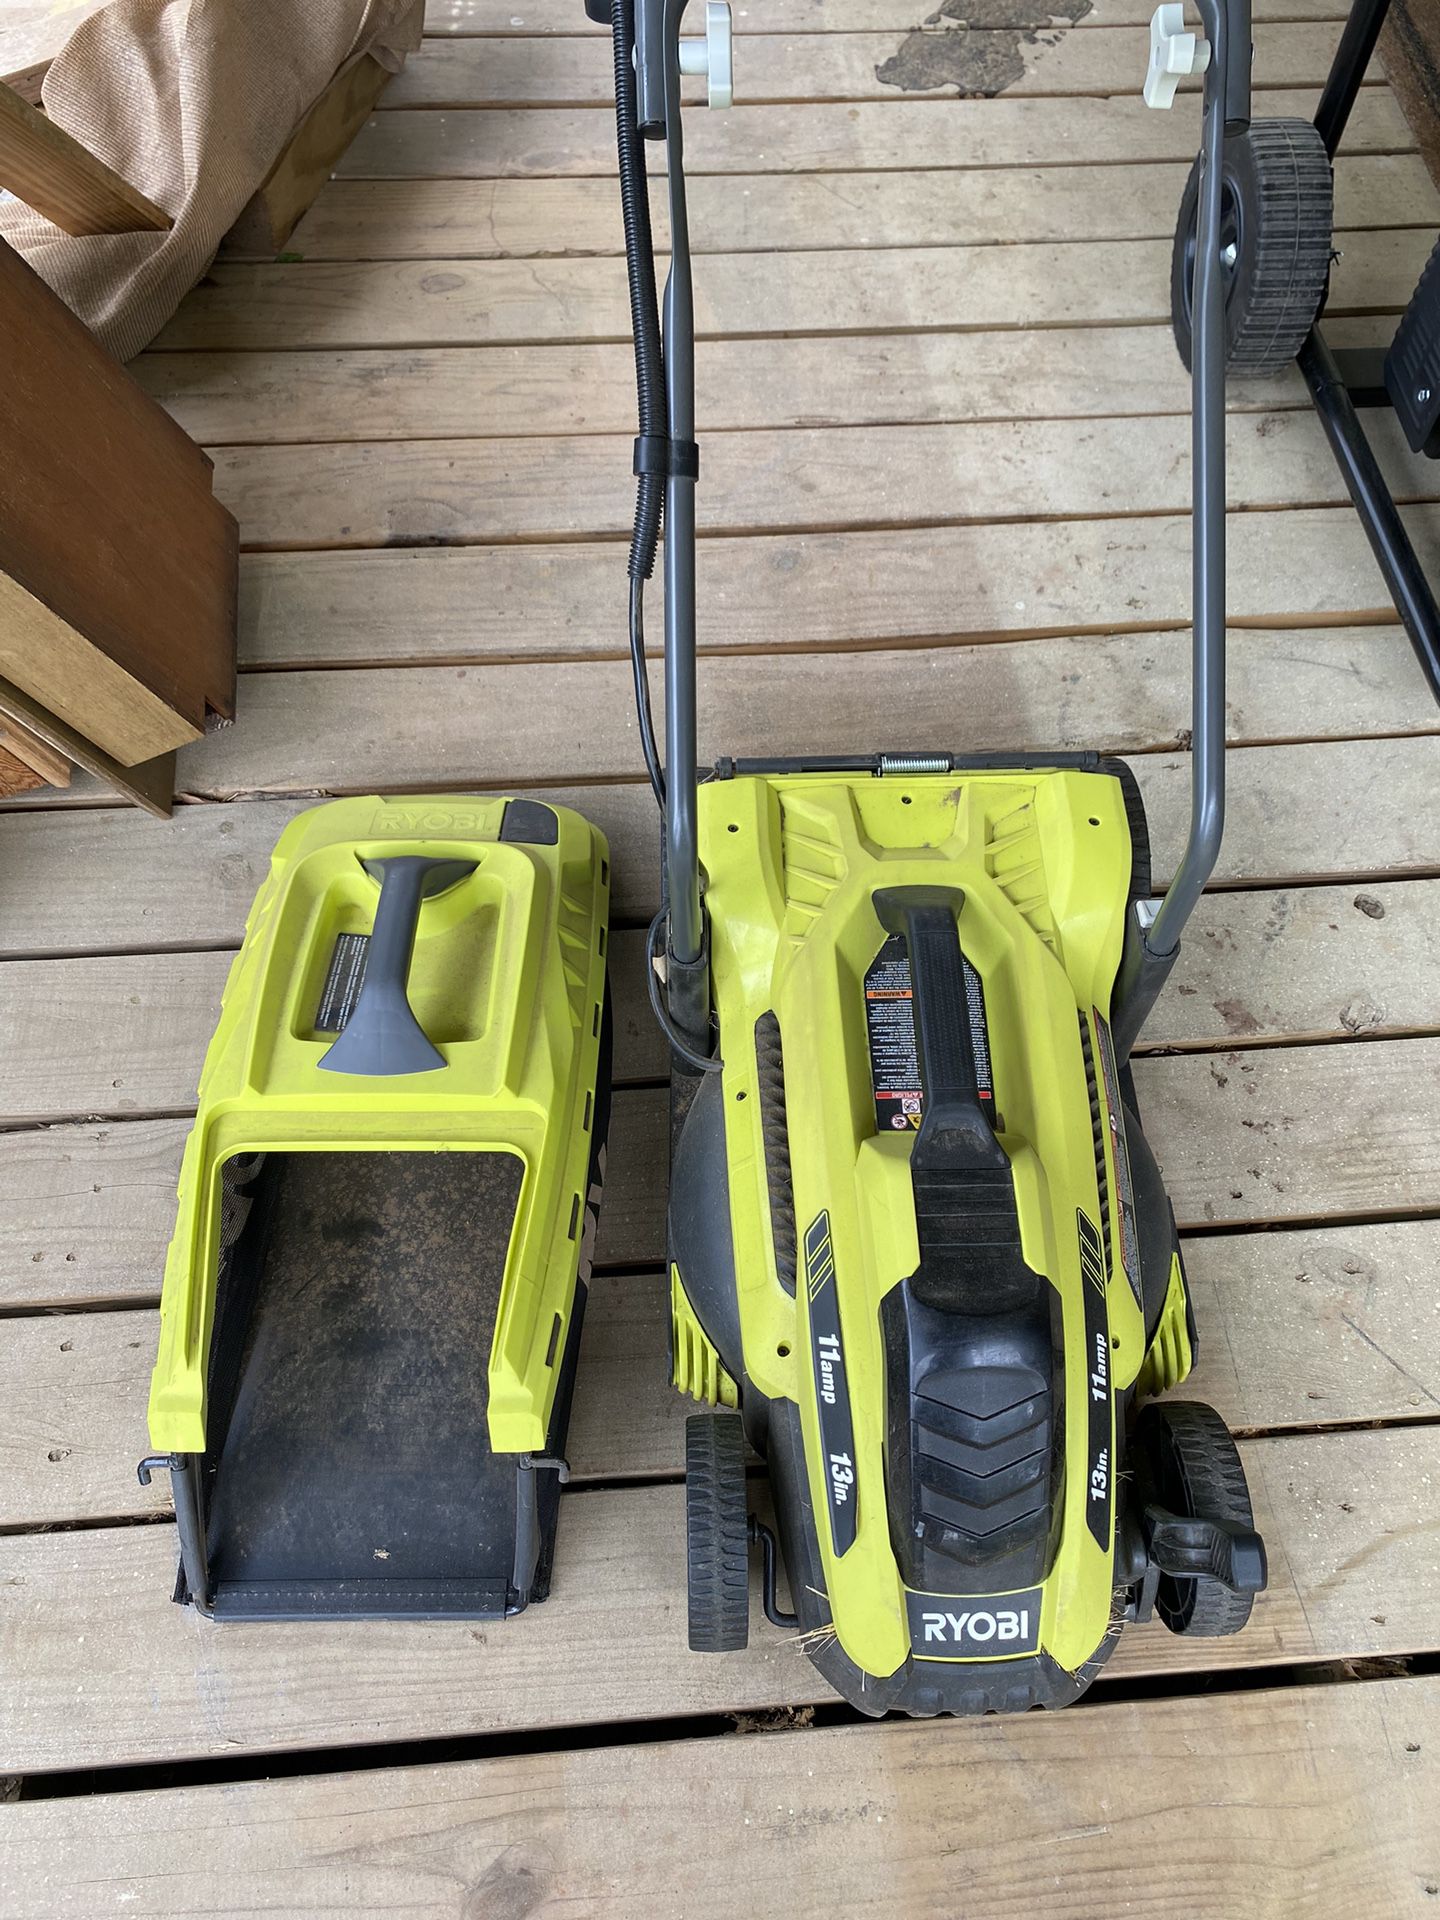 Ryobi Corded Electric 13 inch 11amp Push Mower - Has Issues Needs To Be Fixed